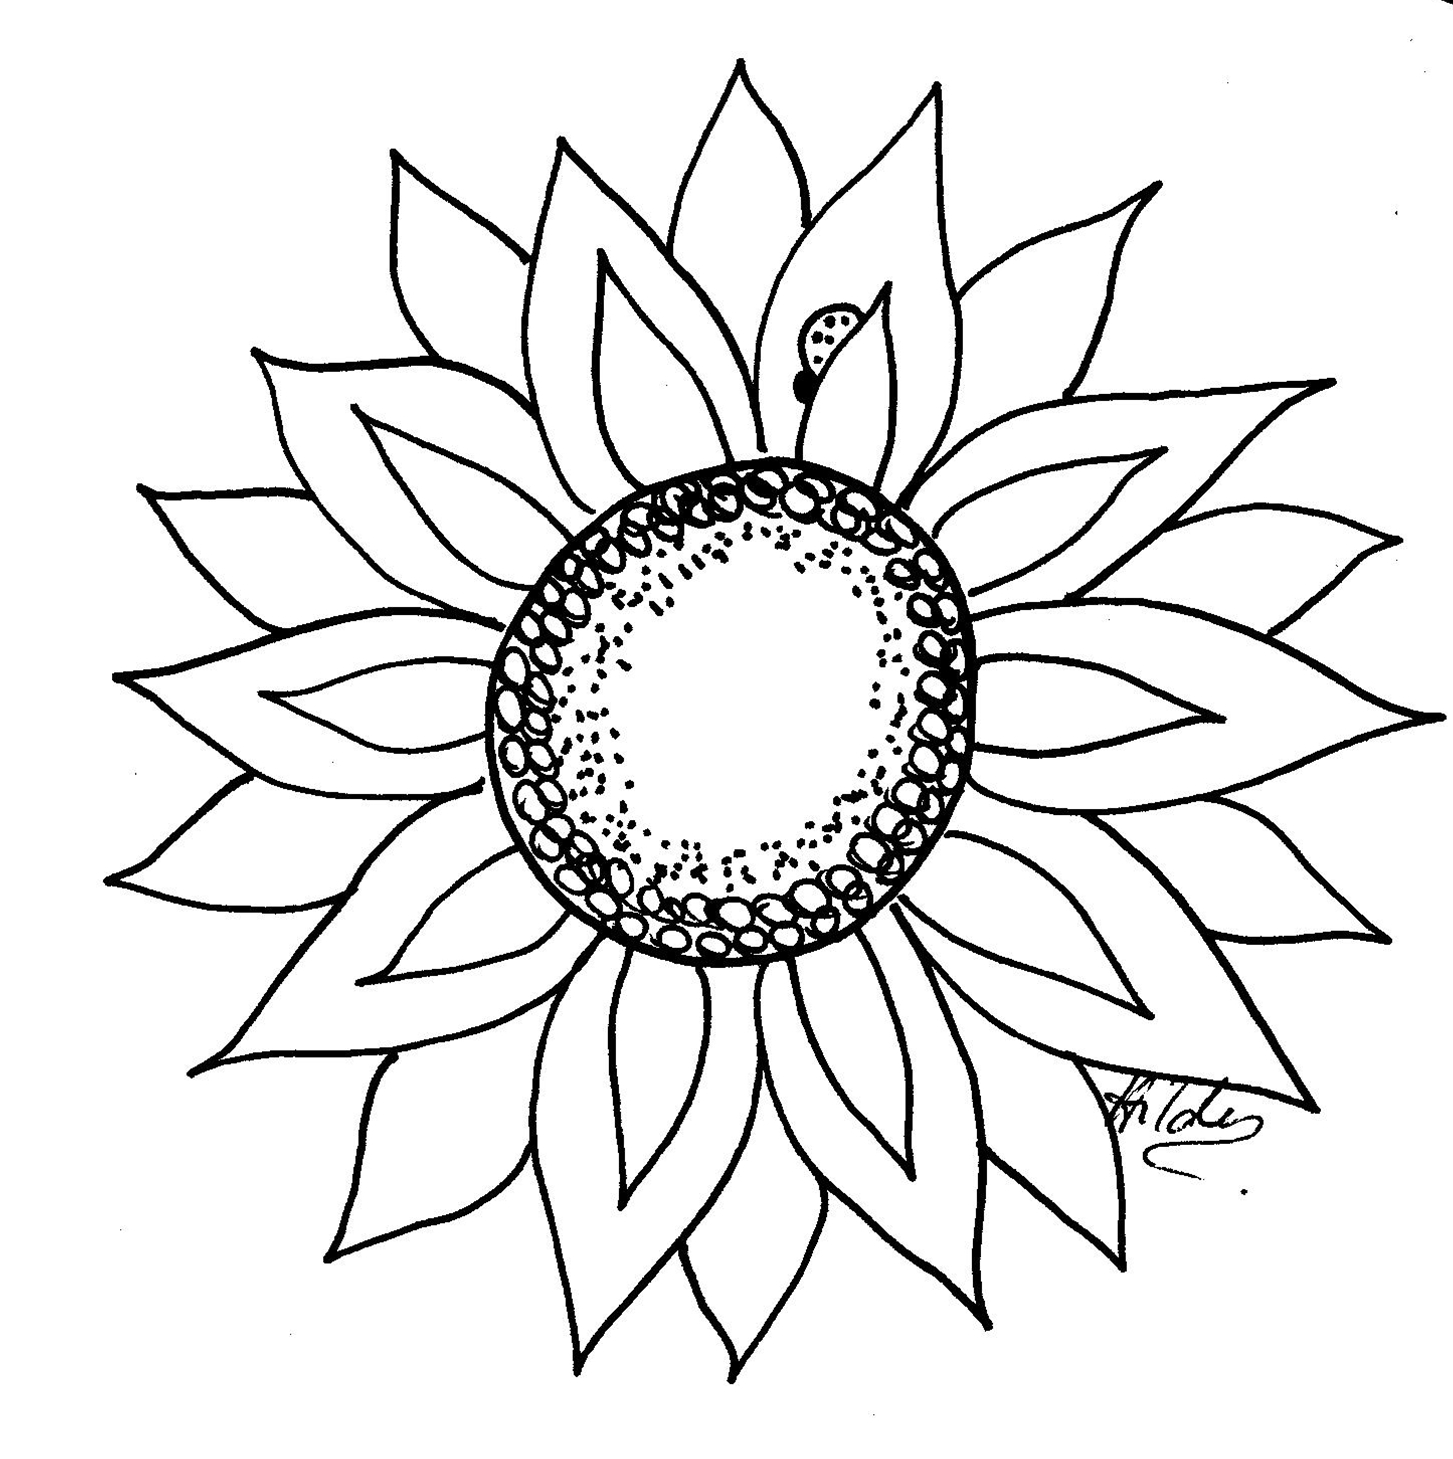 Free Sunflower Template, Download Free Clip Art, Free Clip Art On - Free Printable Sunflower Template